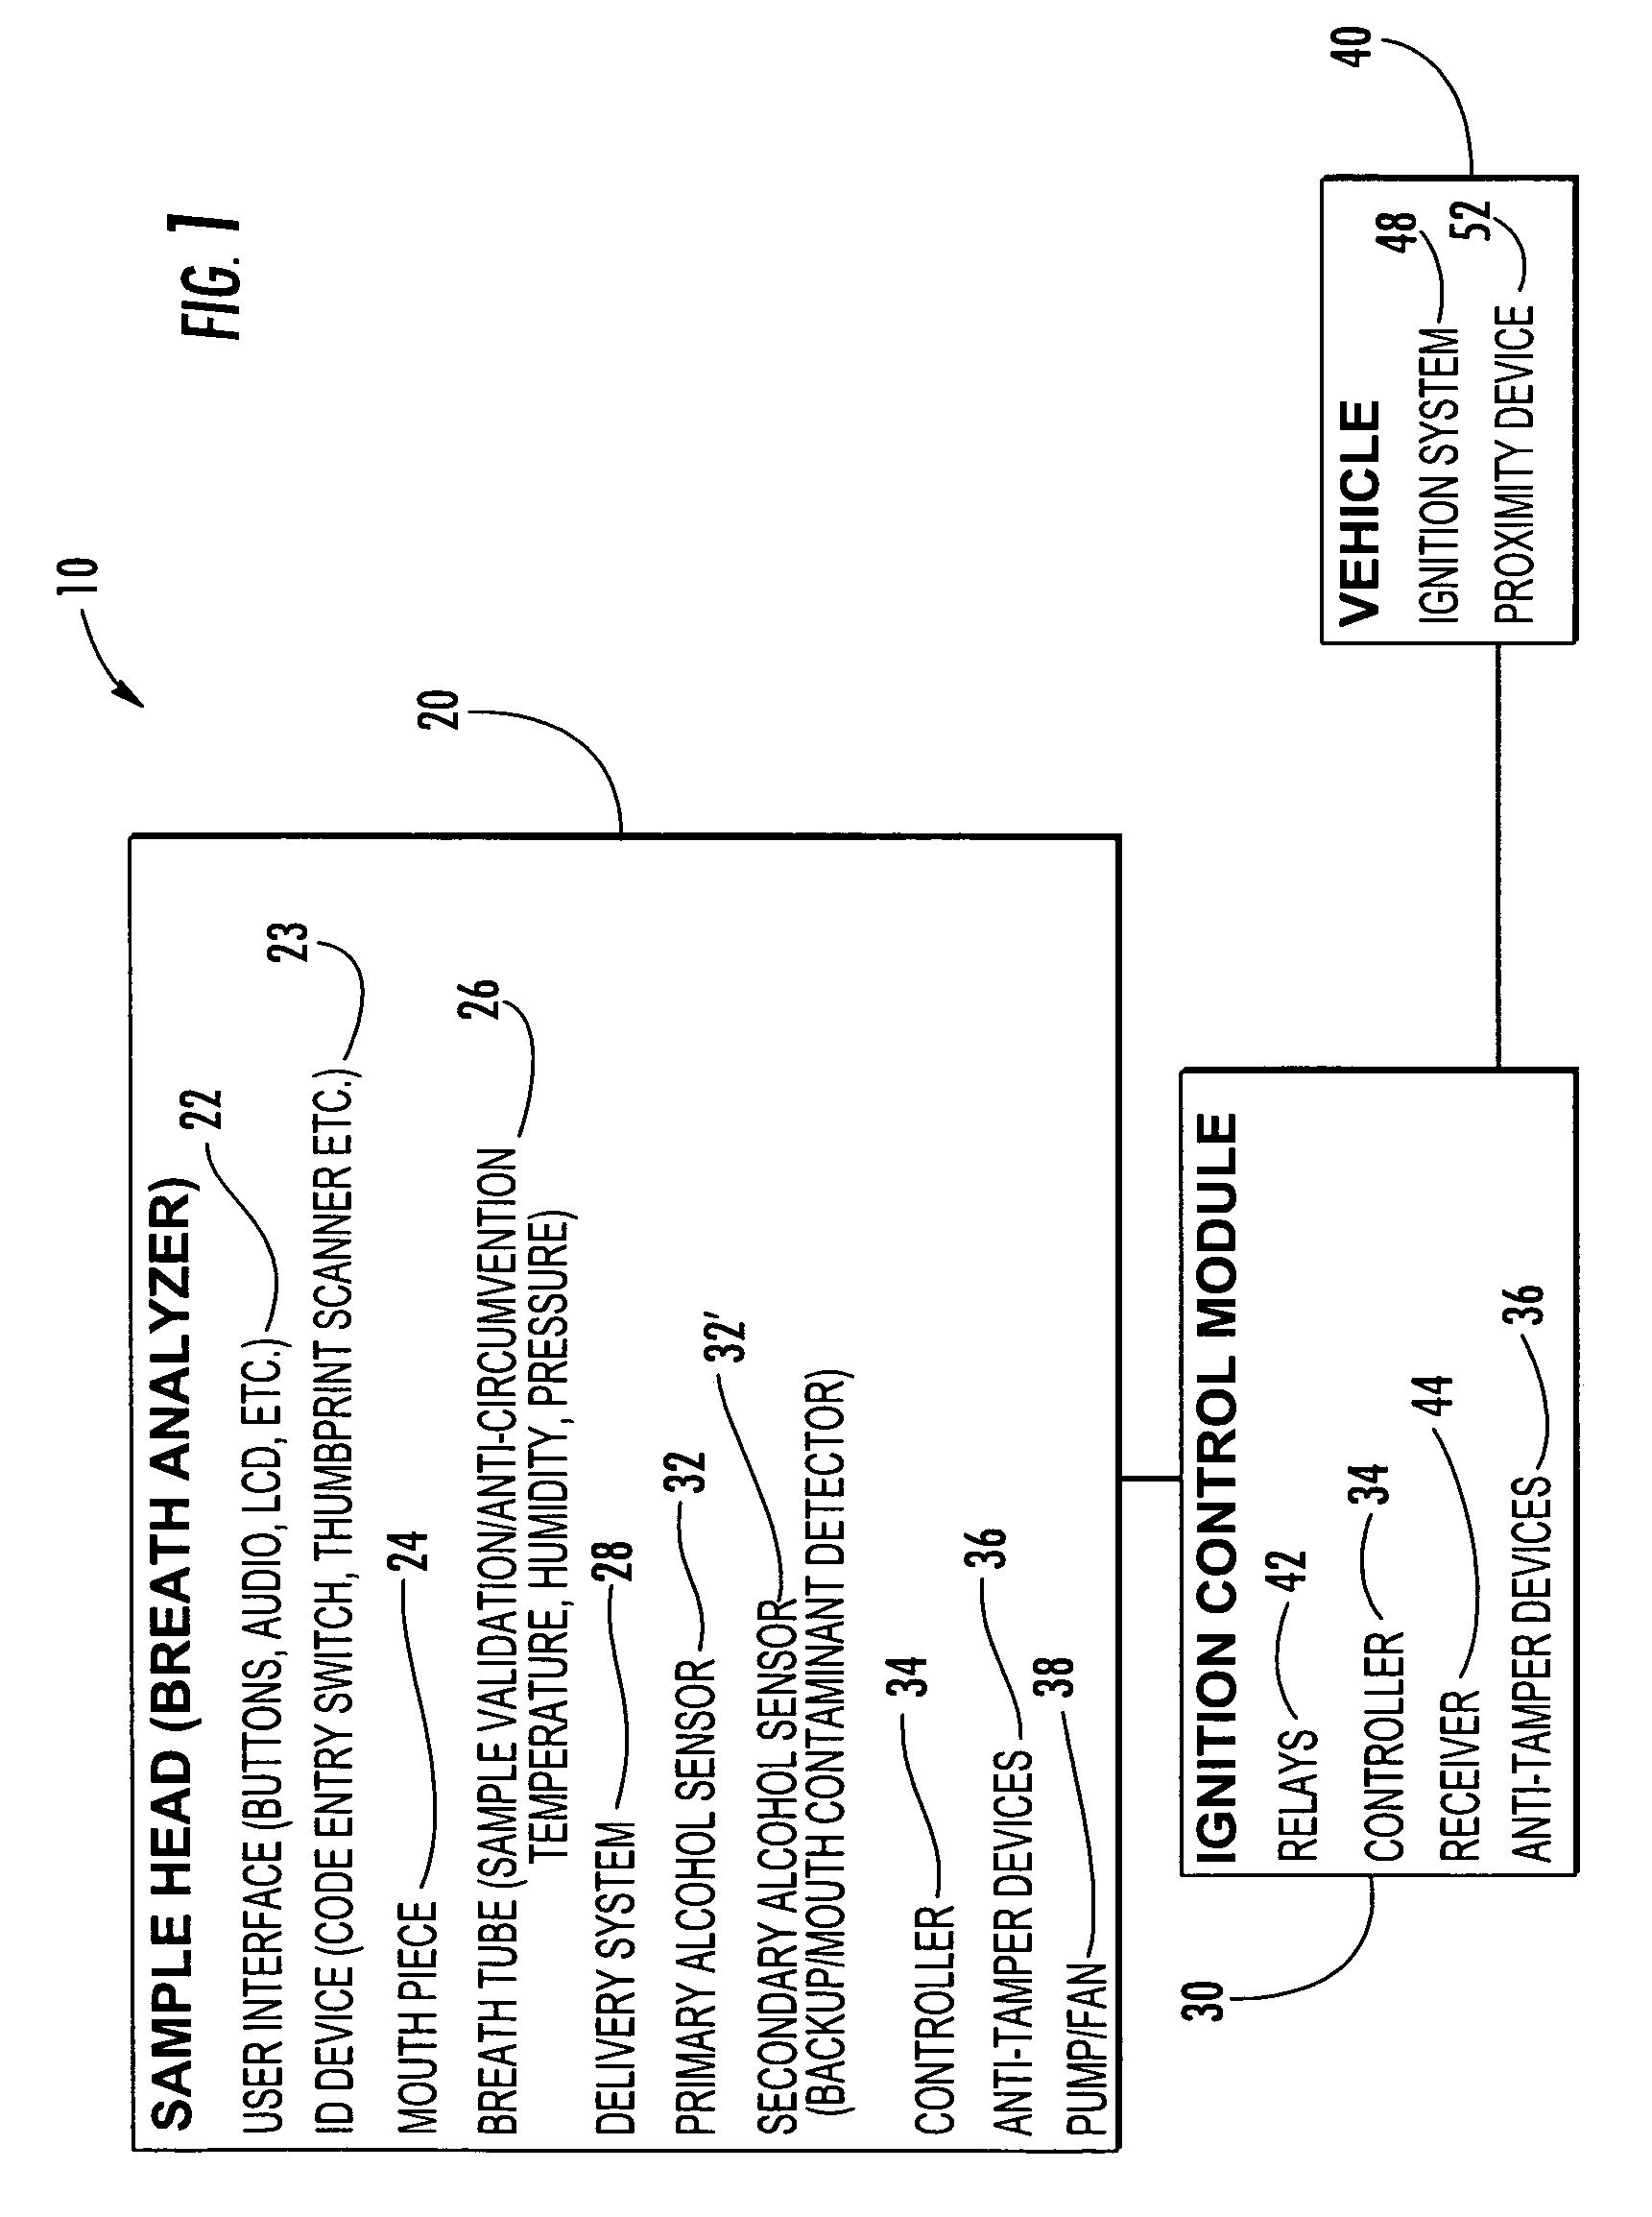 Vehicle ignition interlock systems that detect the presence of alcohol within vehicles